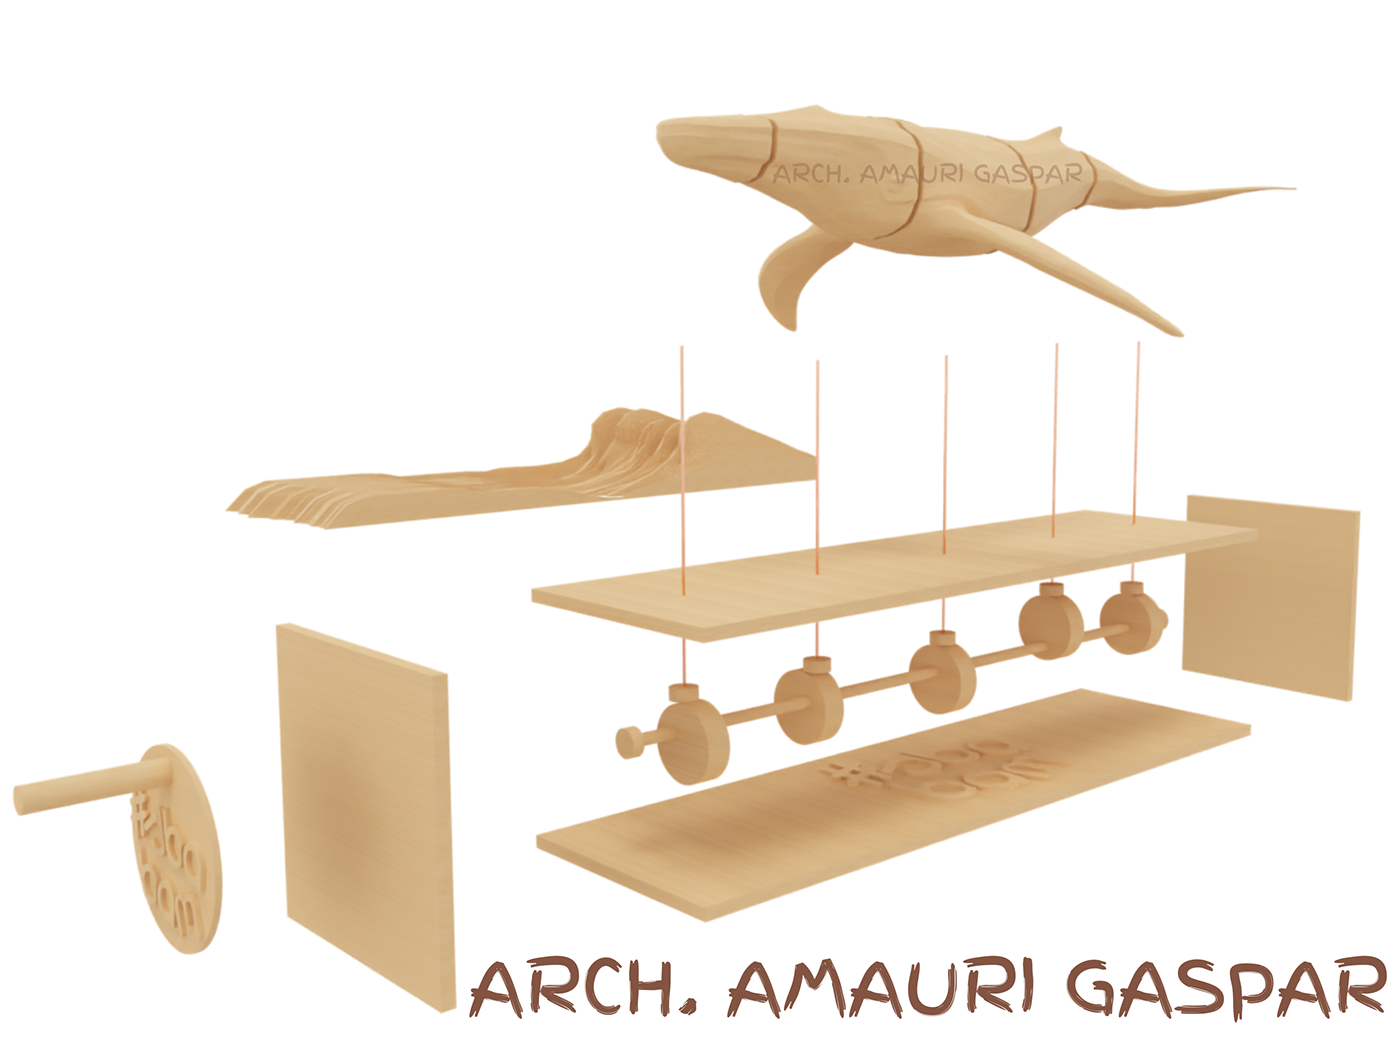 automaton Whale 3D architecture toy 3d printing 3d design modeling wood toy laser cut